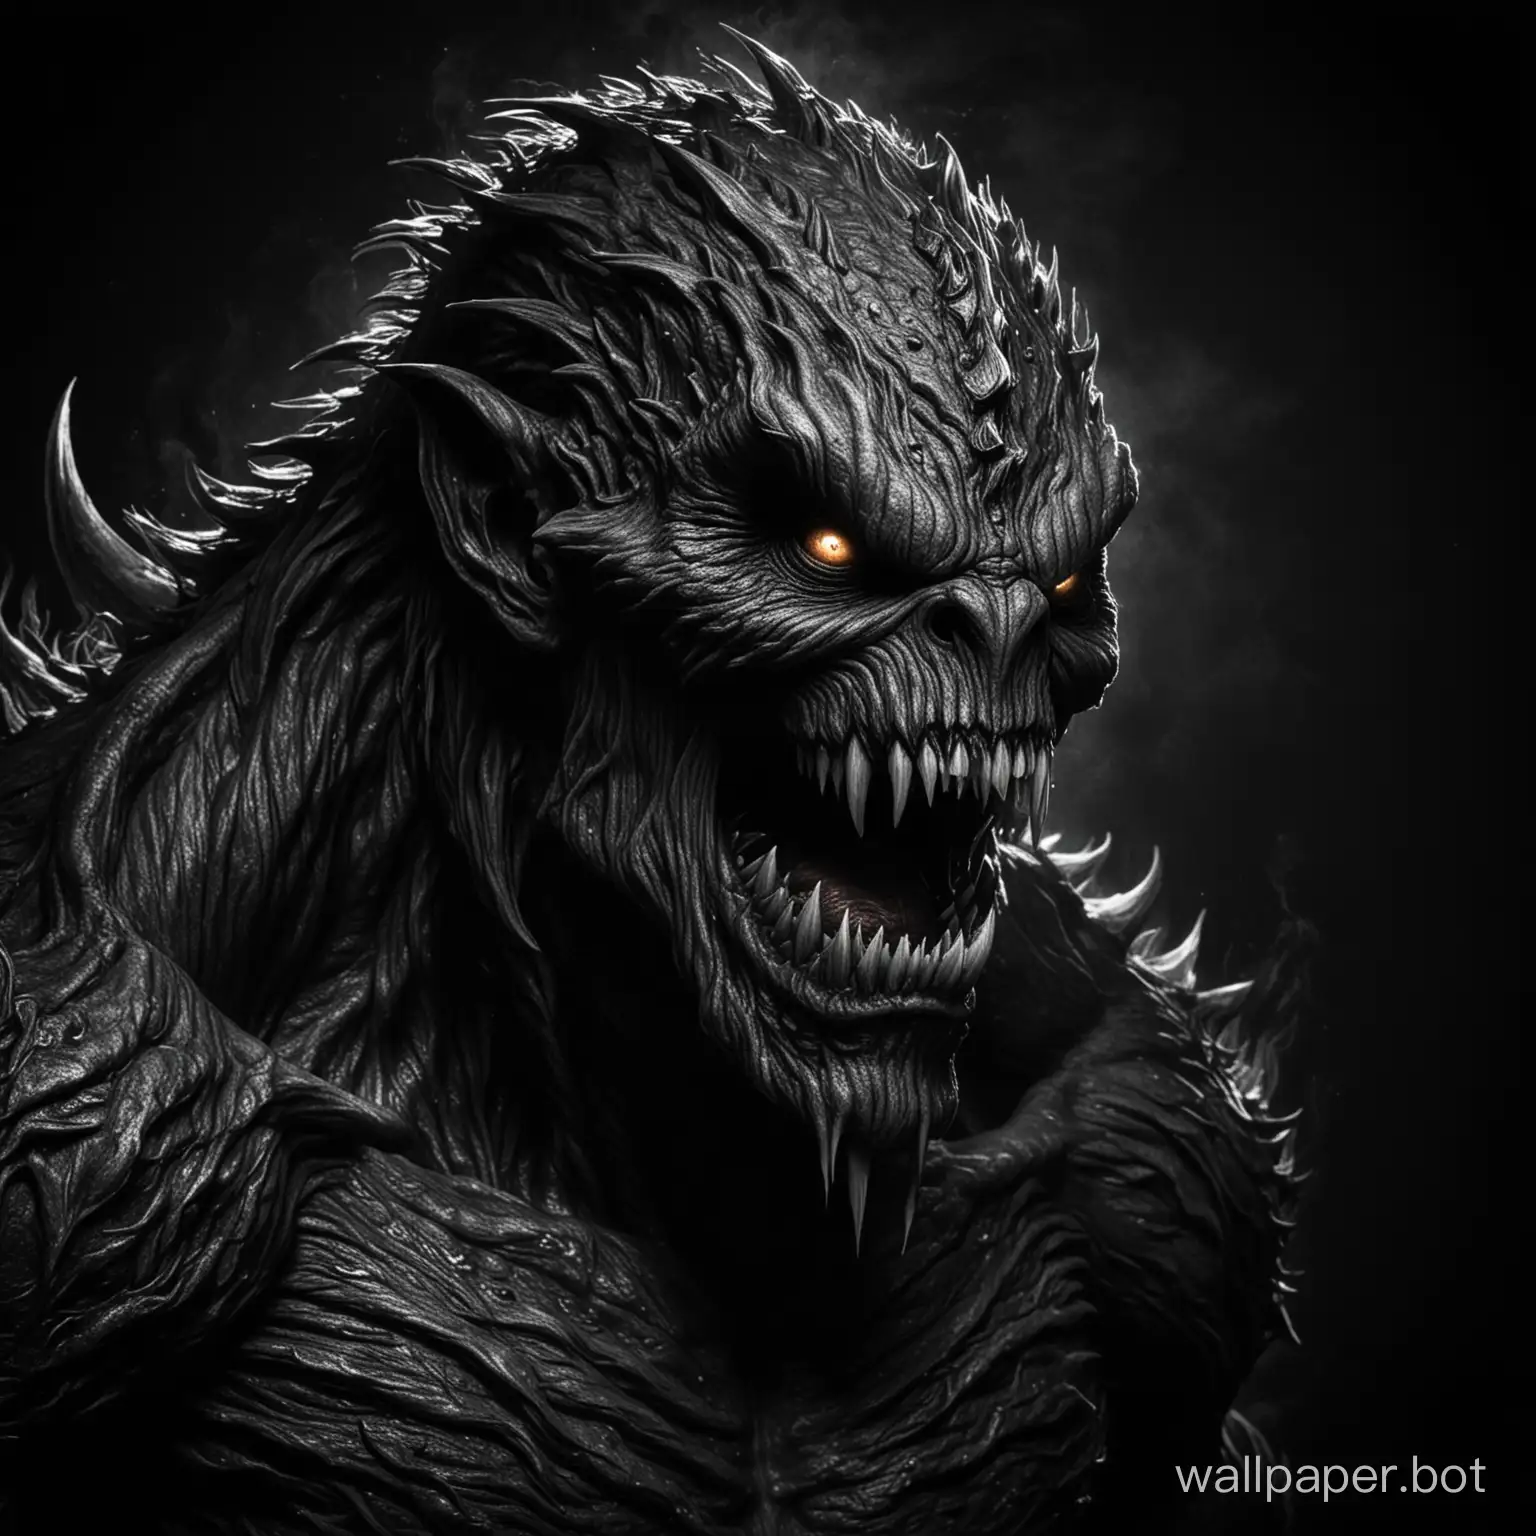 Fantasy-Horrible-Scary-Monster-Emerging-from-Darkness